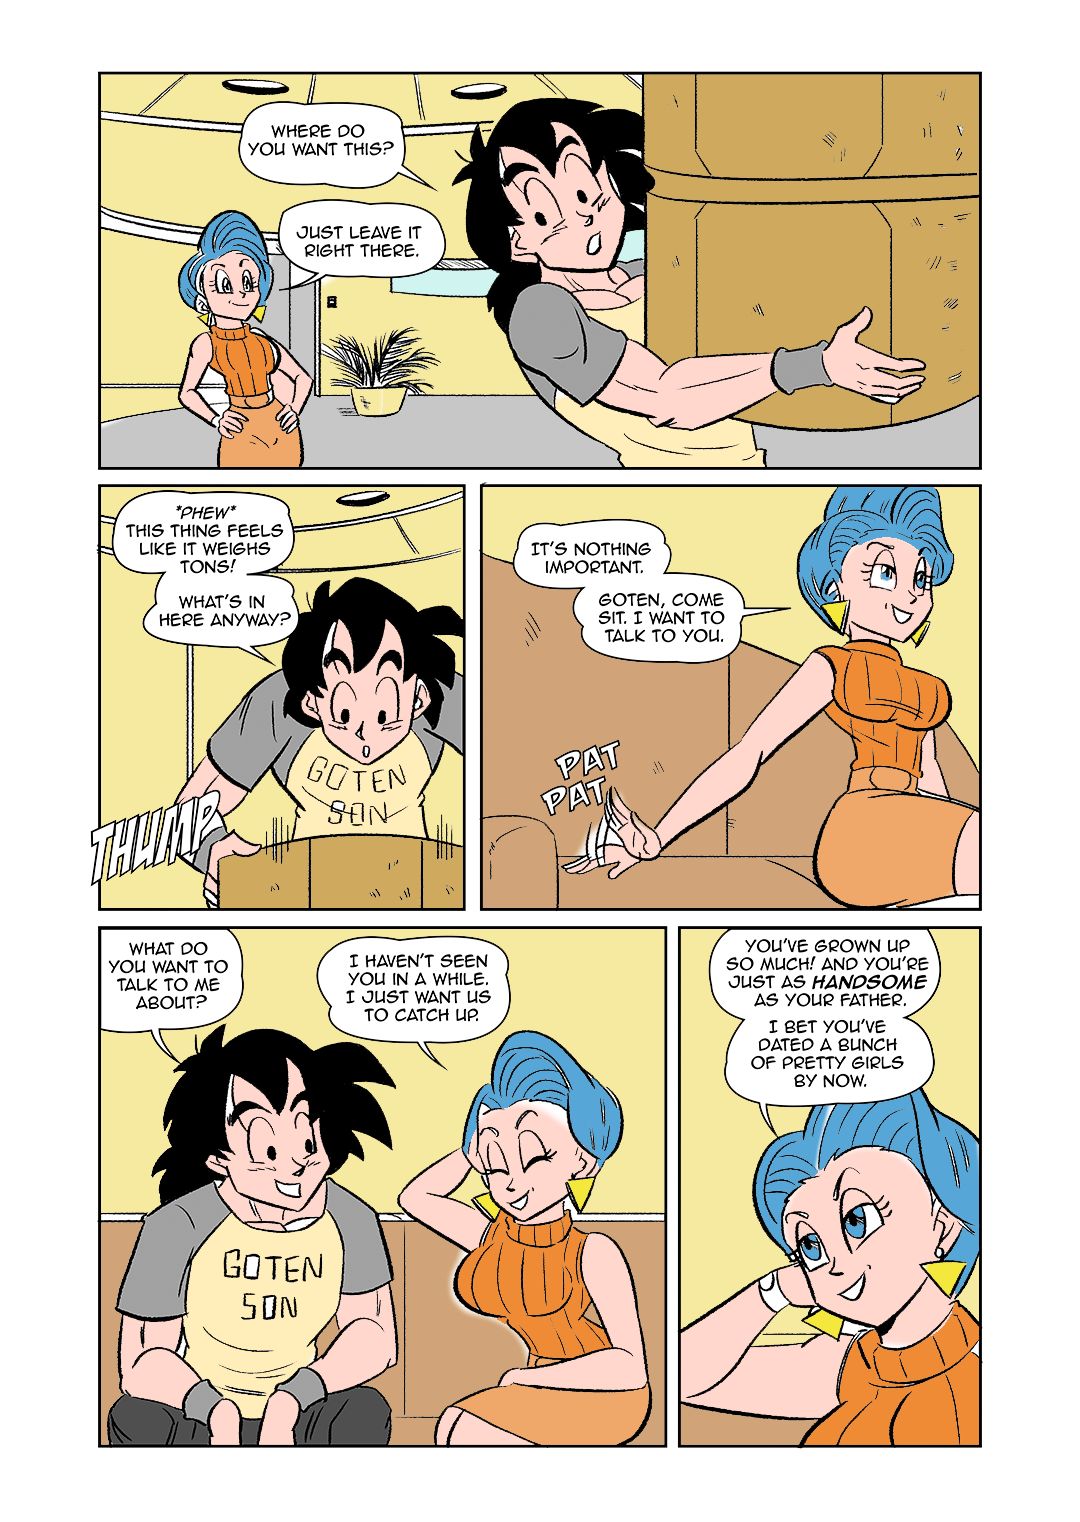 The Switch Up (Dragon Ball Z) by Funsexydb page 7